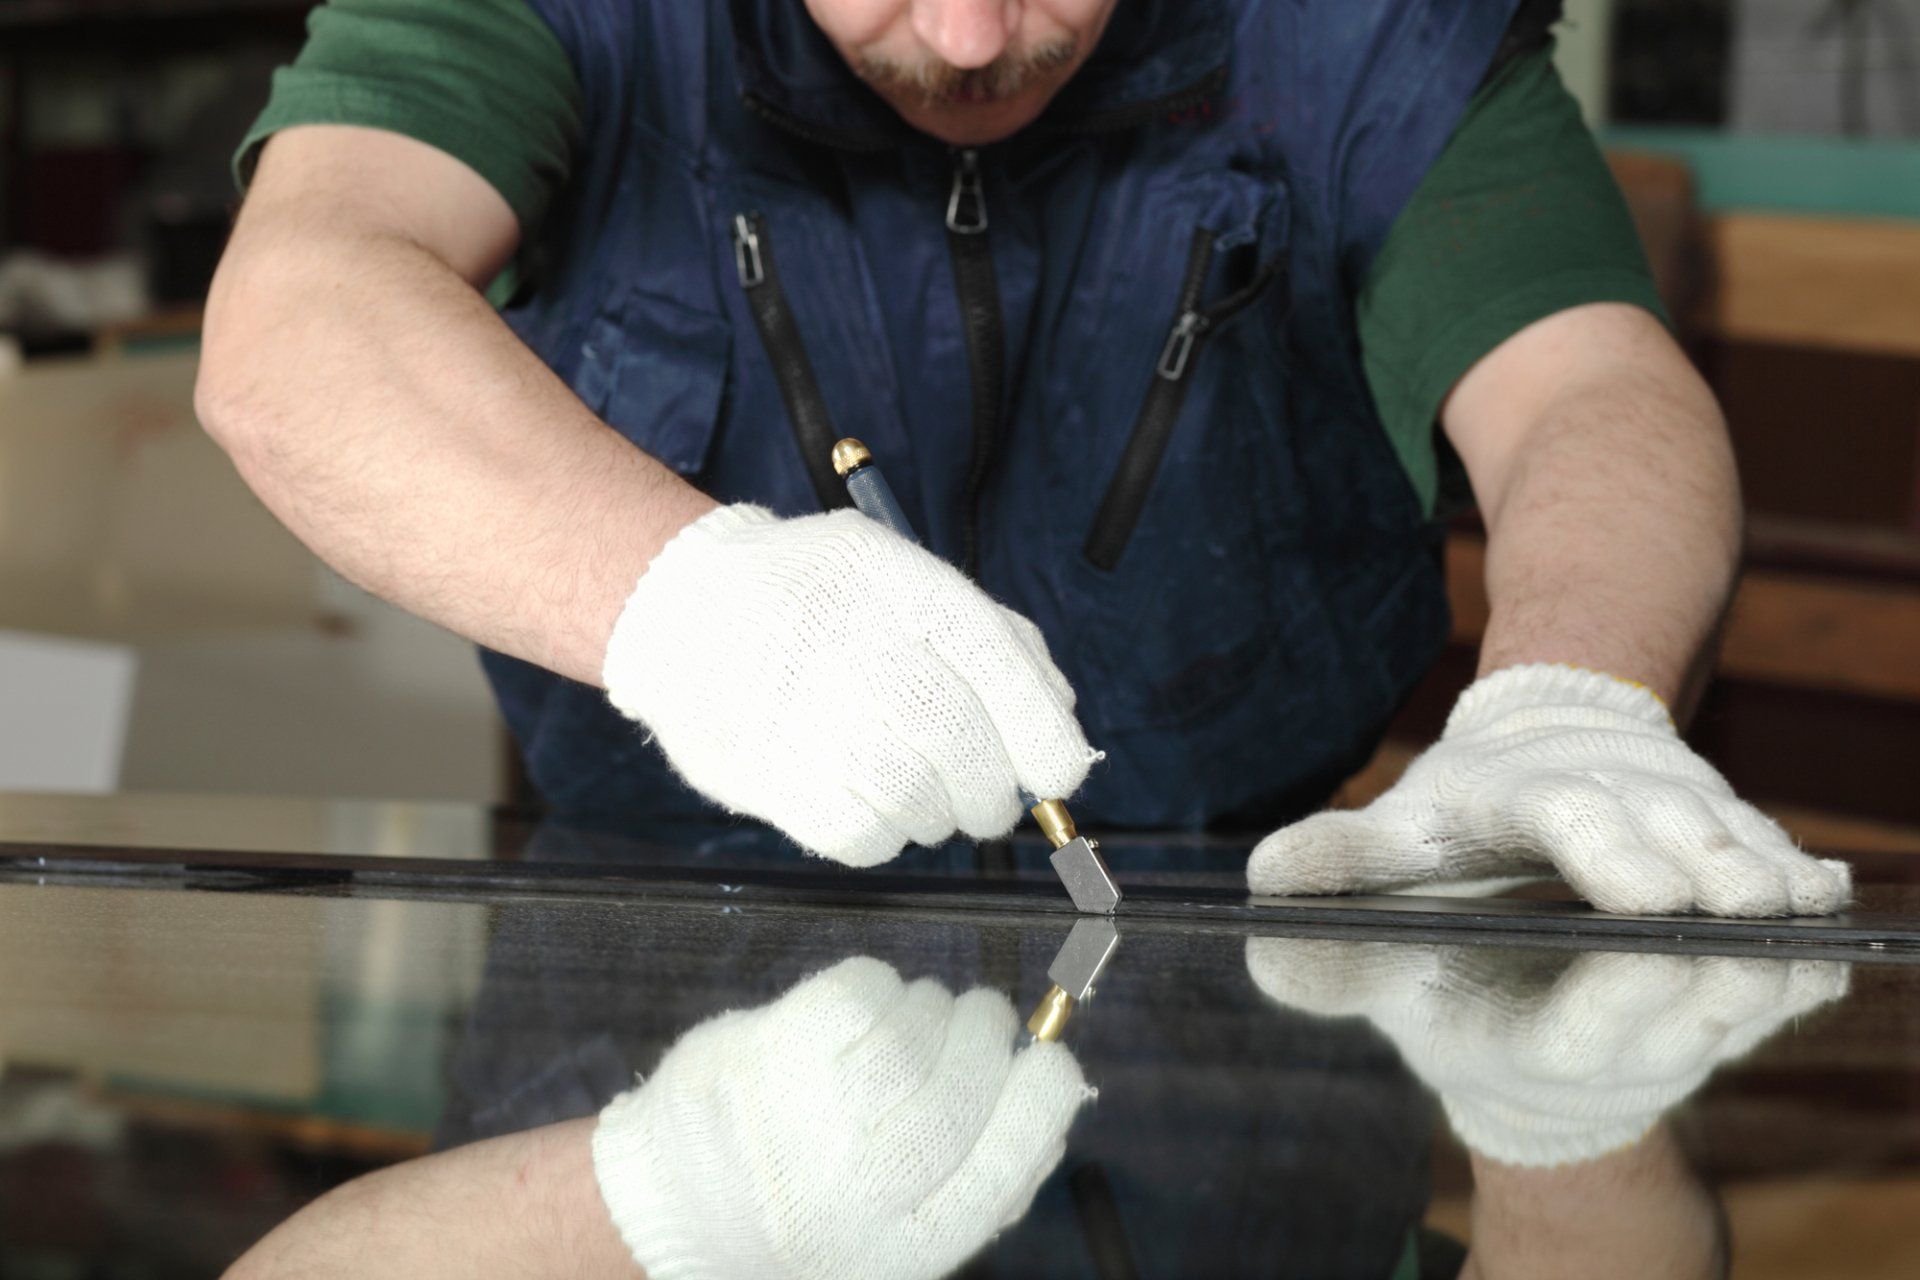 A man is cutting a piece of glass with a glass cutter.